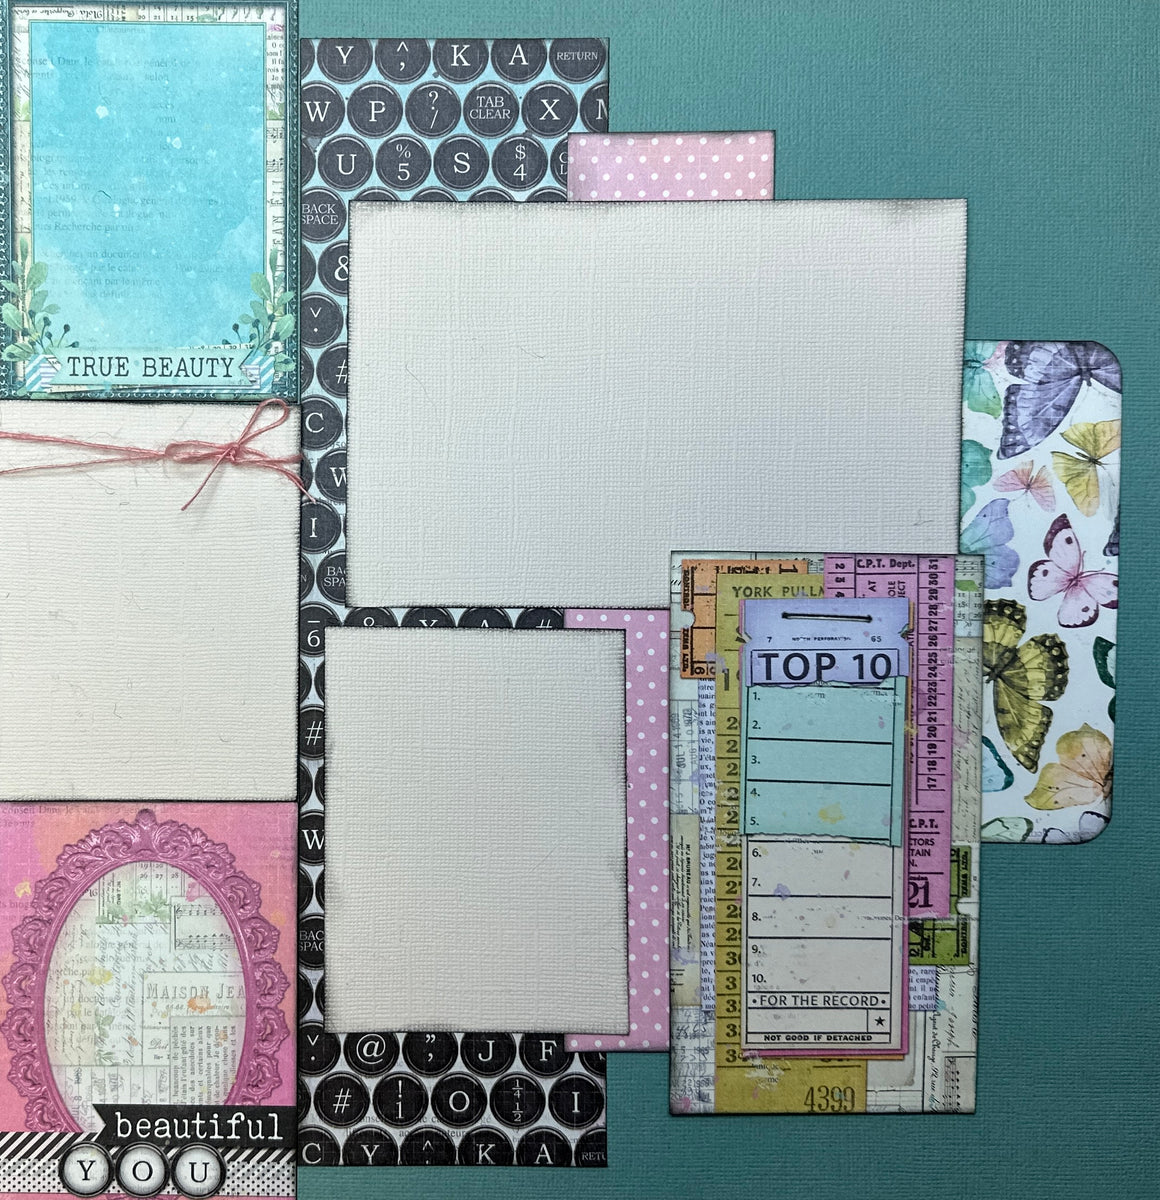 Spread Love, Not Germs, Covid themed 2 Page Scrapbooking Layout Kit Sc –  Crop-A-Latte